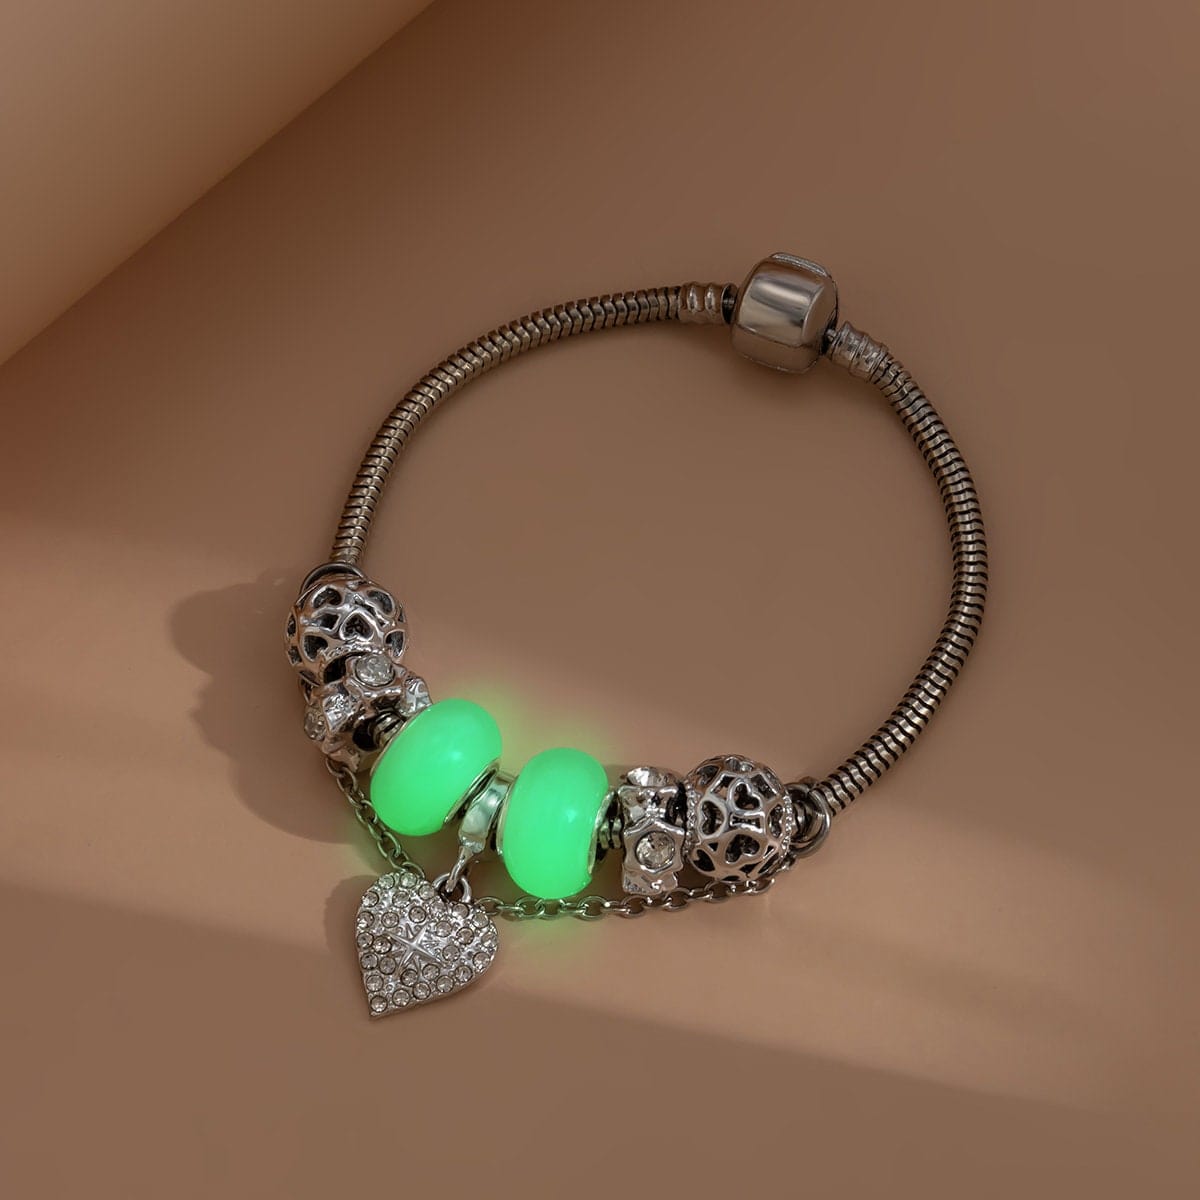 Buy Carina Sterling Silver Green Murano Glass Charm Pandora Bracelet for  Women Girls at Amazon.in